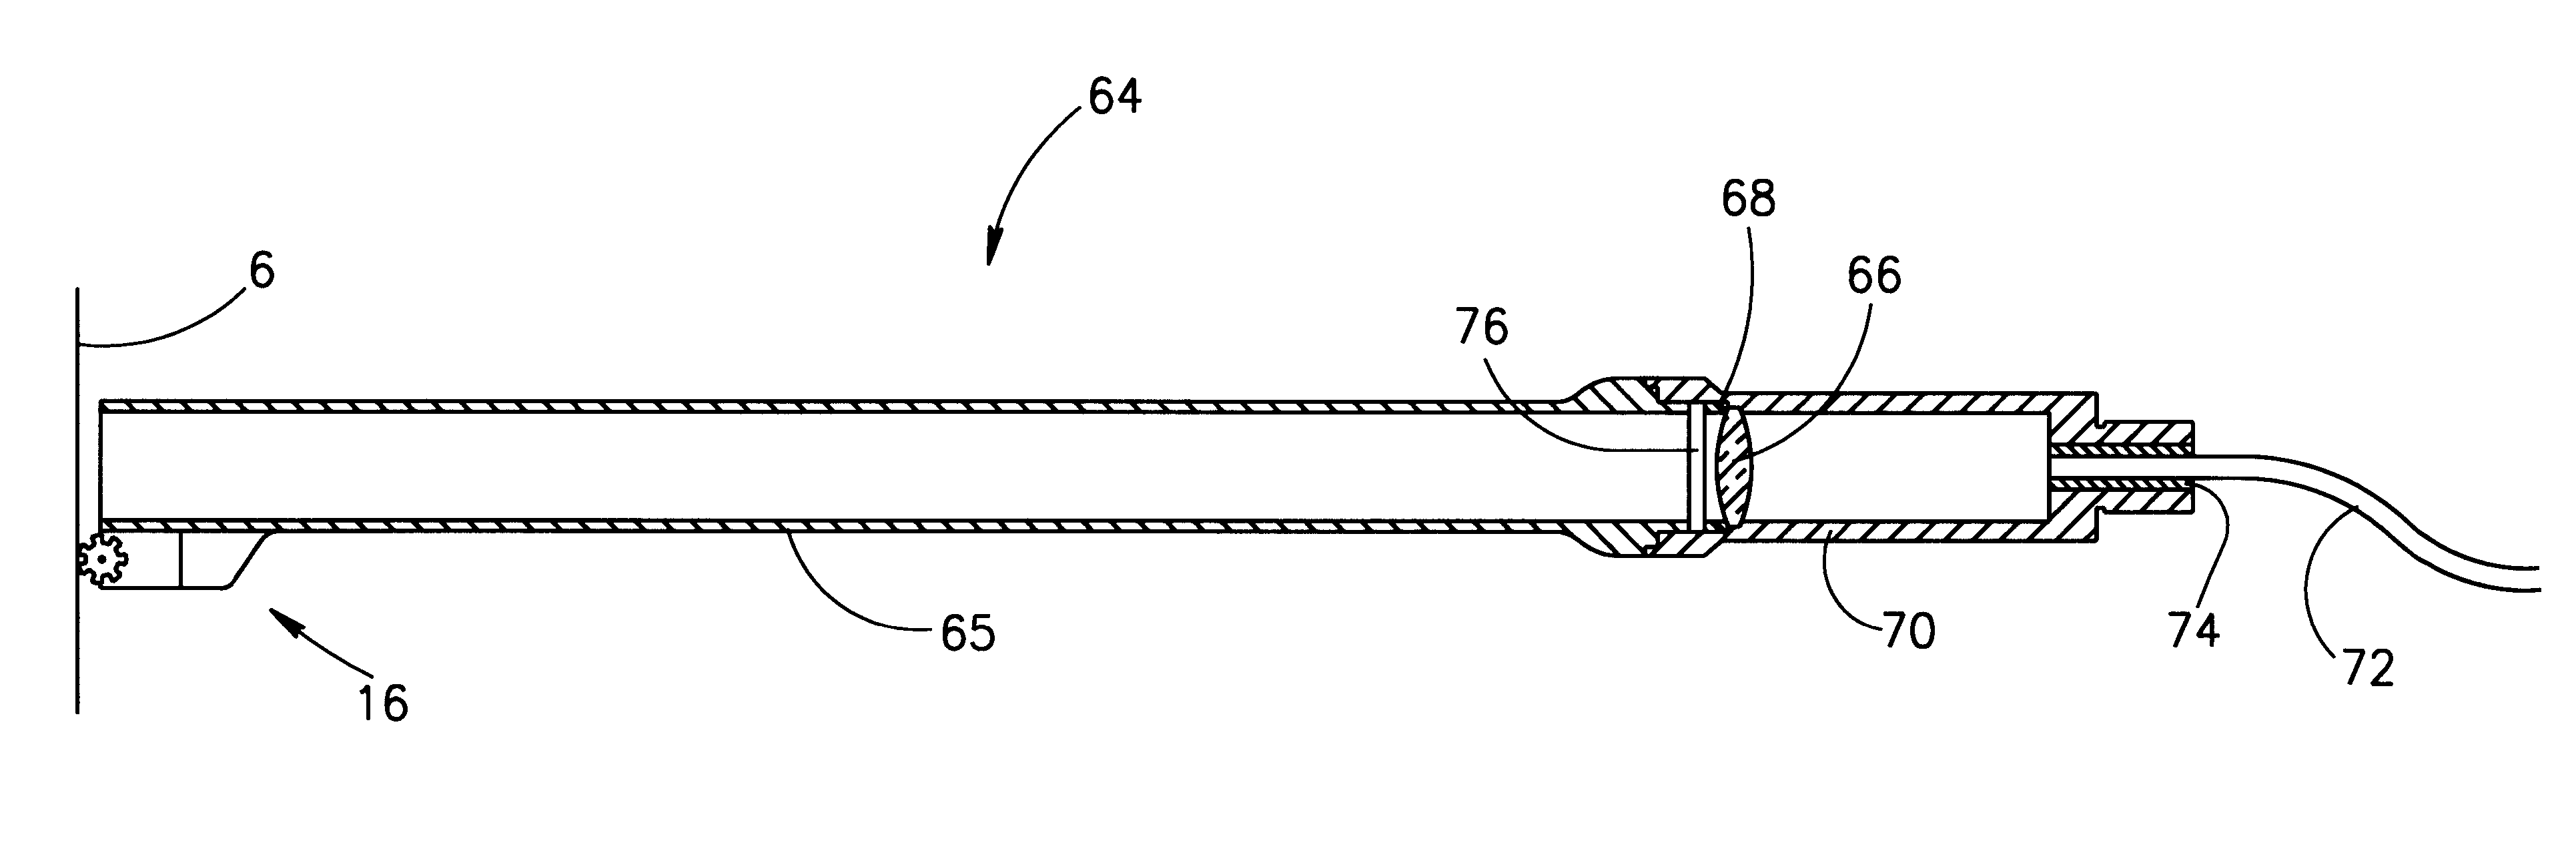 Apparatus and method including a handpiece for synchronizing the pulsing of a light source